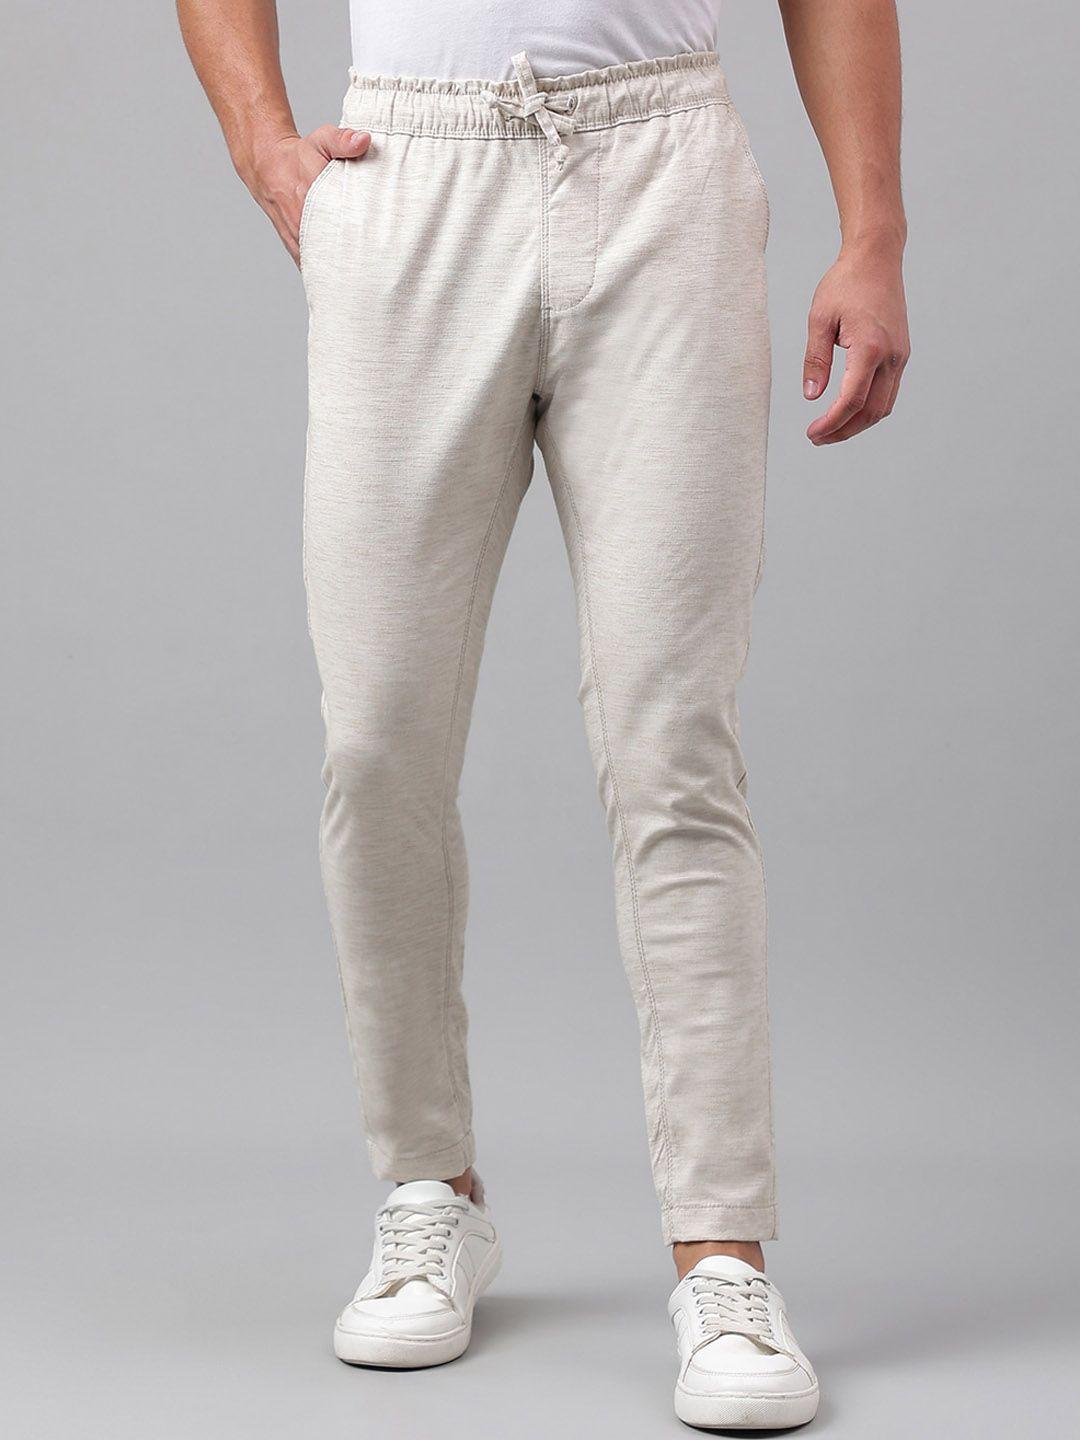 code 61 men cream-coloured jogger low-rise stretchable jeans